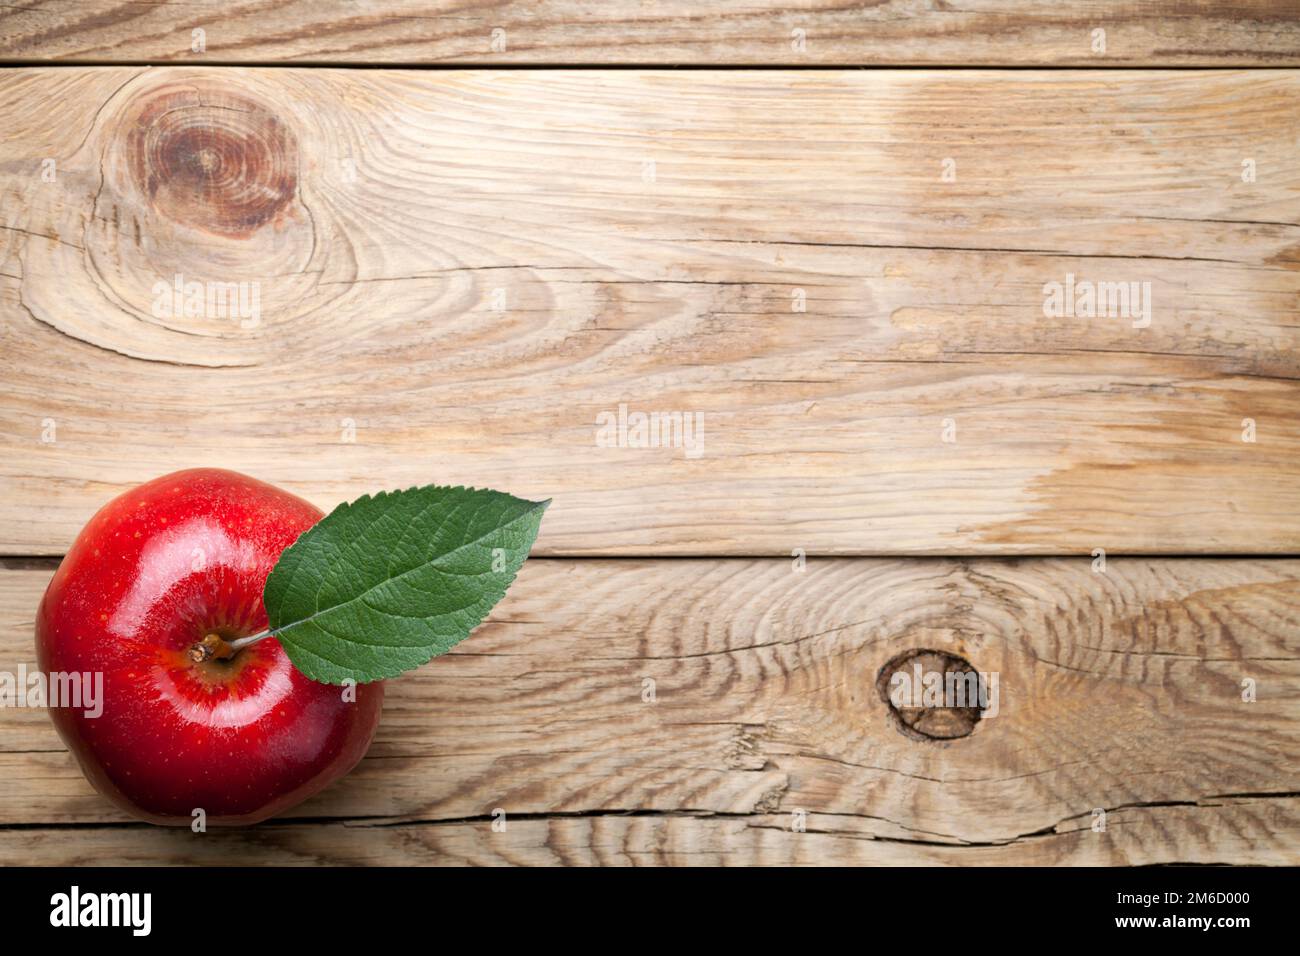 Red Apple with Green Leaf on Wooden Table Stock Photo